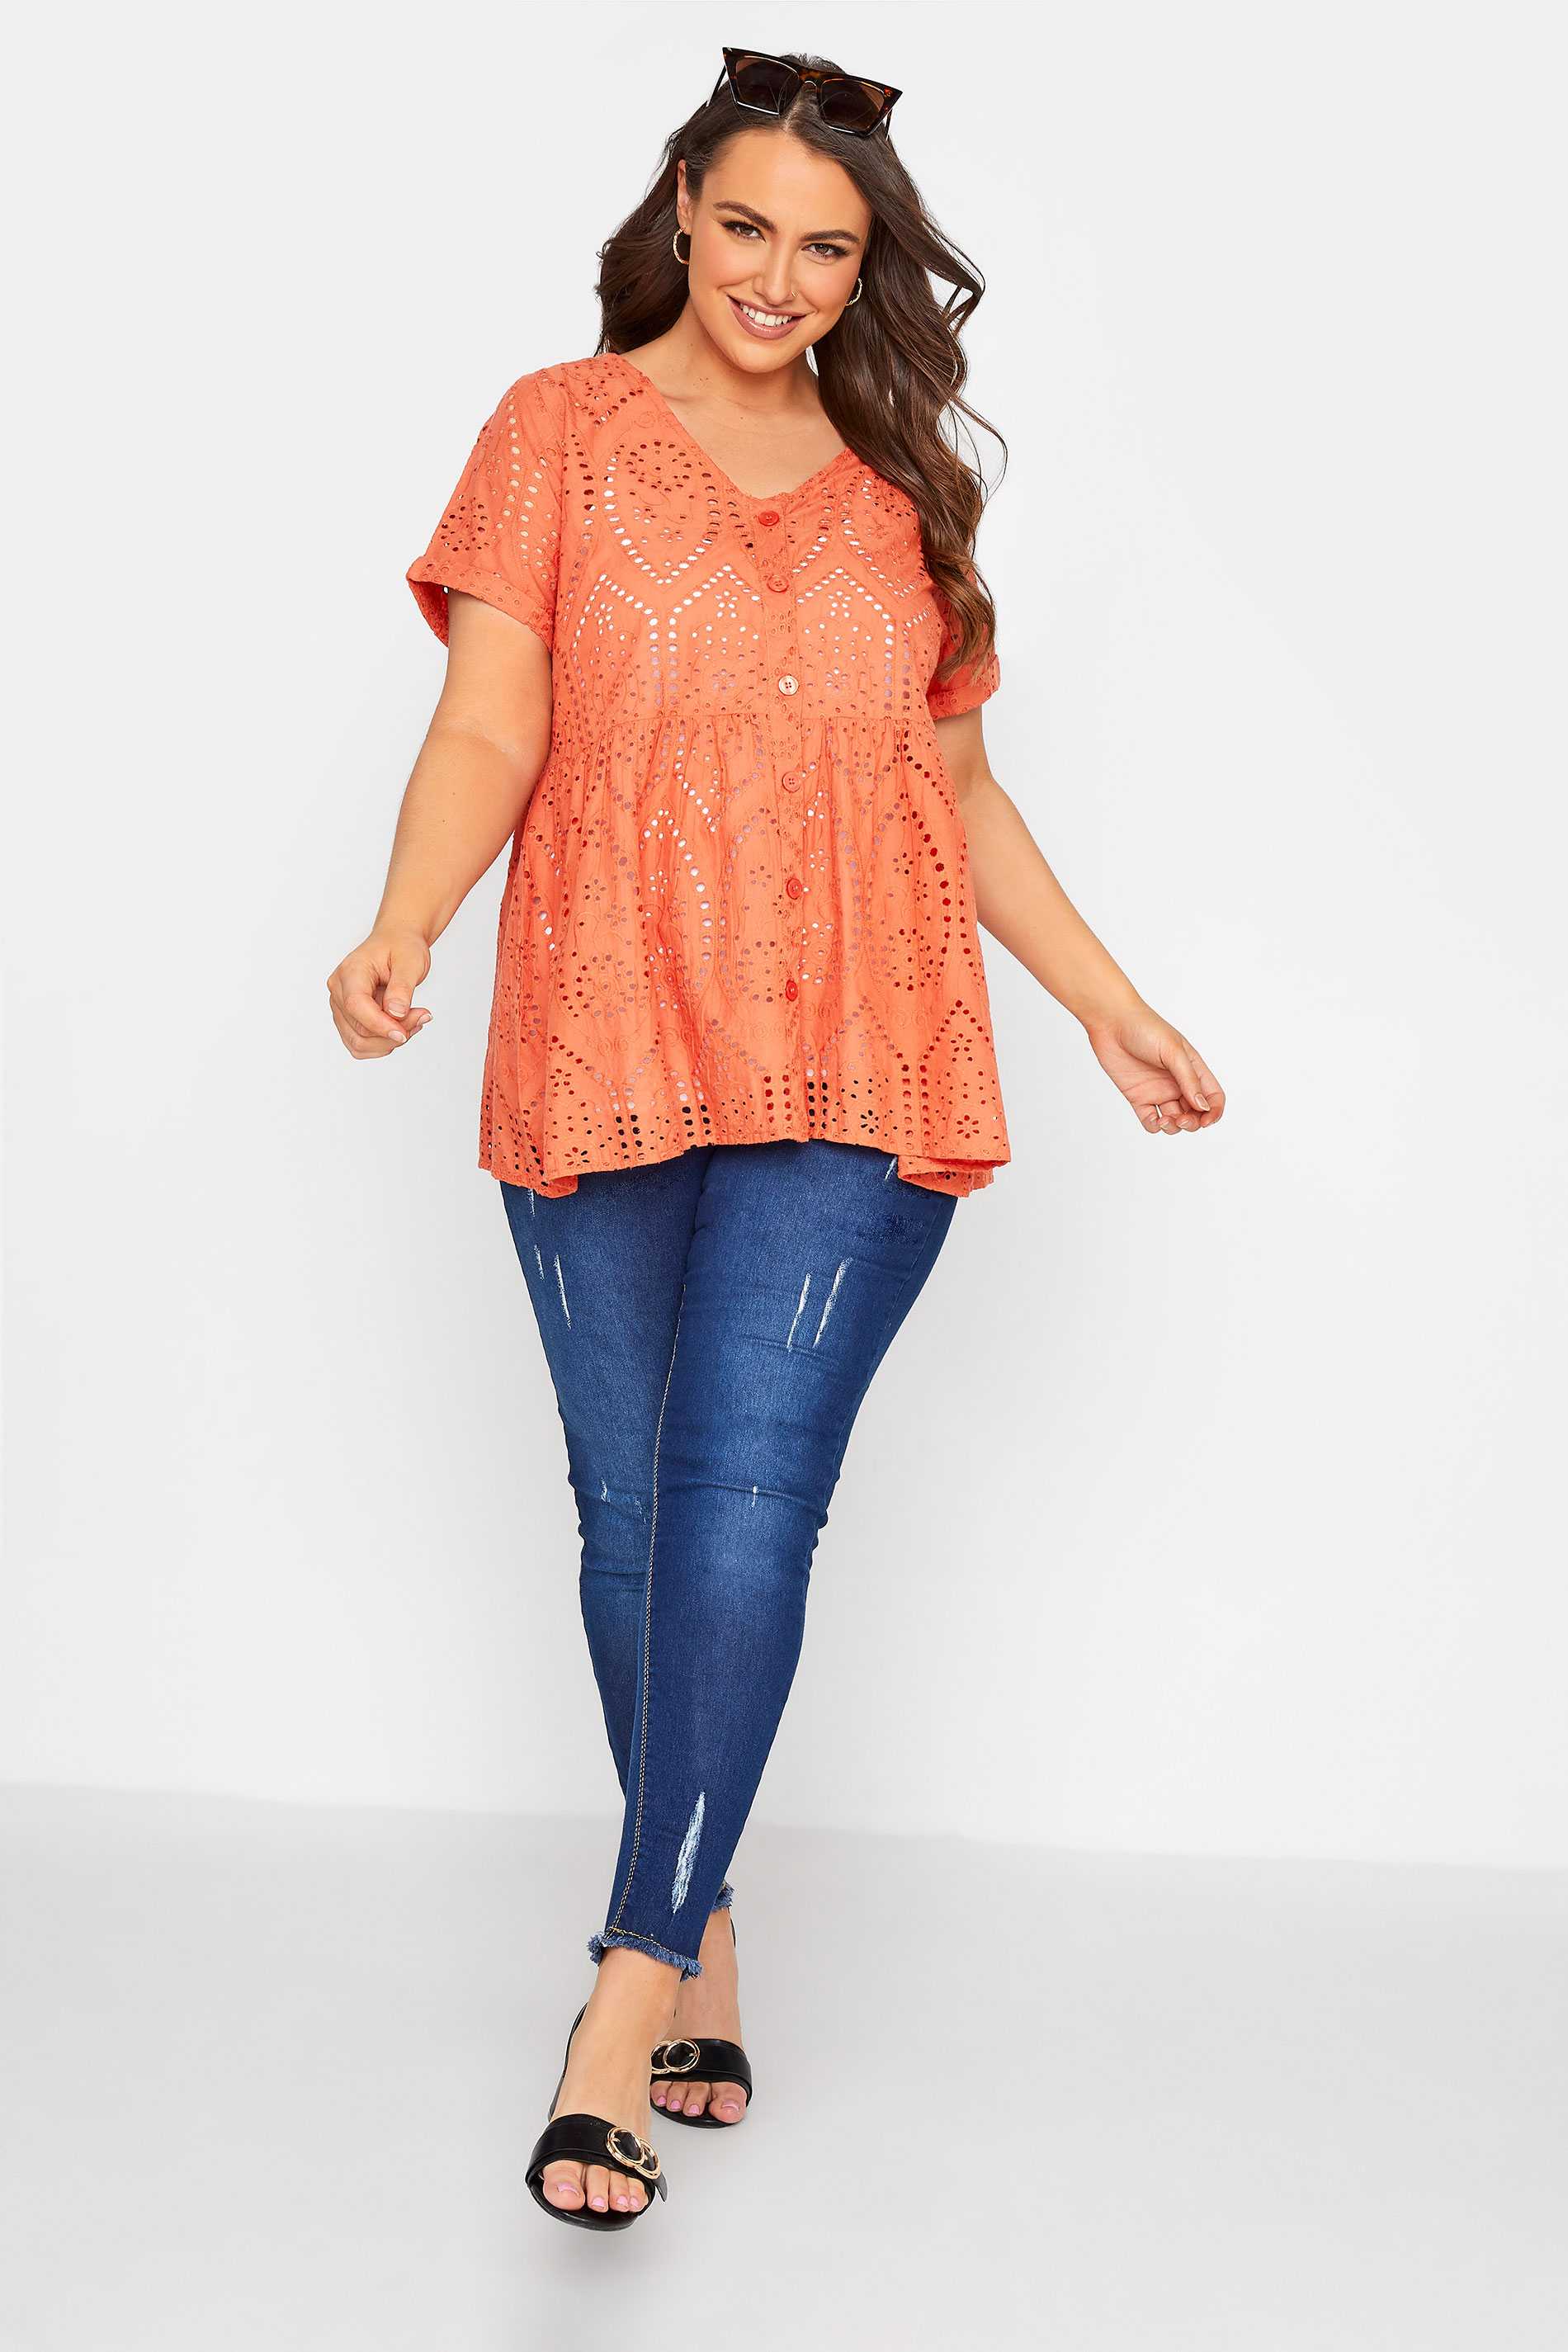 Grande taille  Tops Grande taille  Tops Casual | Top Orange Brodé Smocké Manches Courtes - NC77372